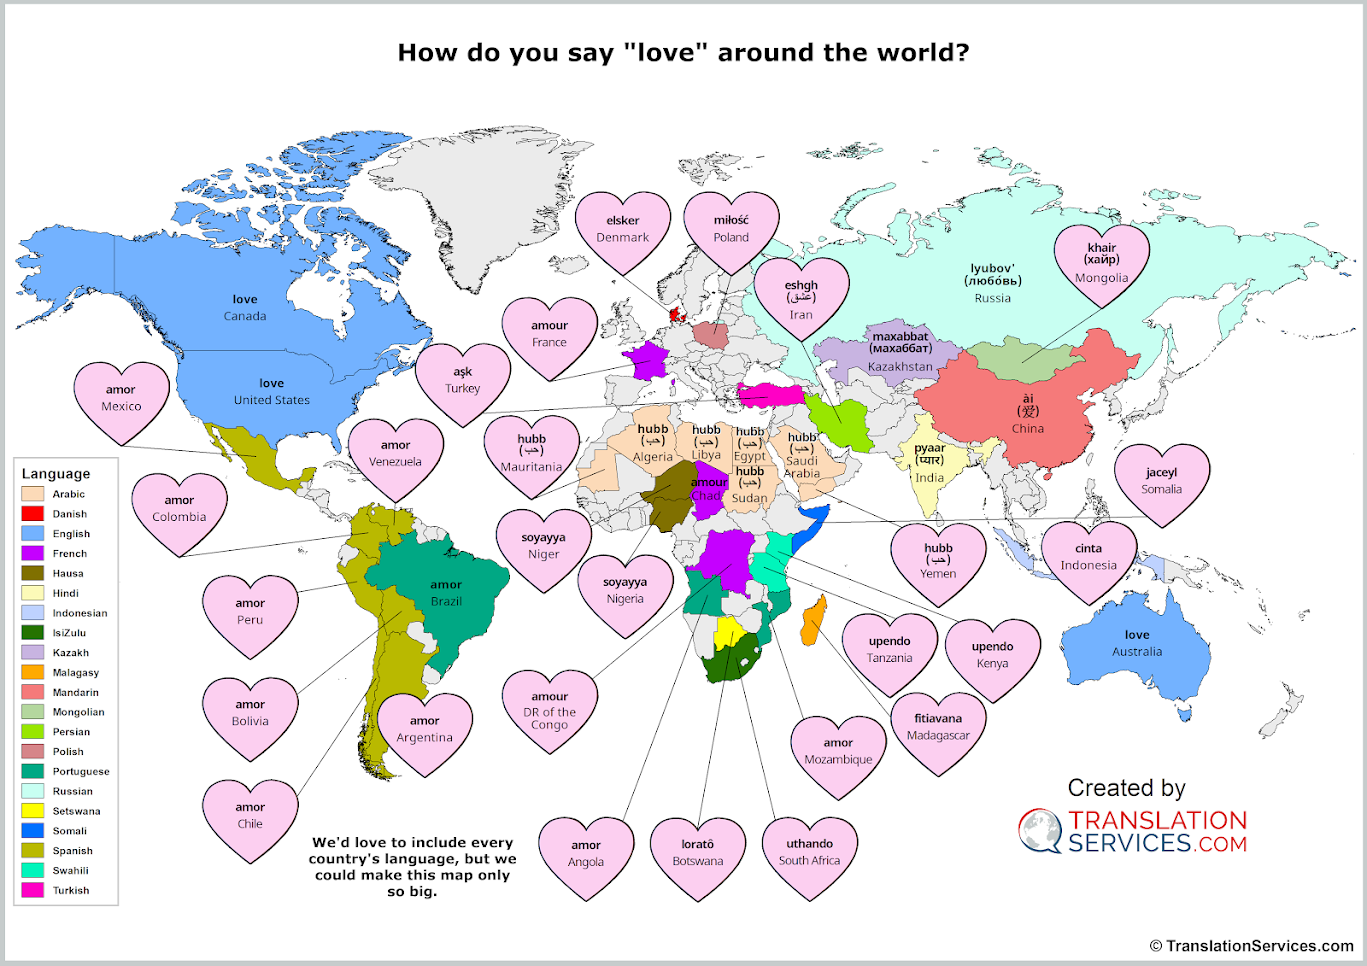 How Do You Say “Love” Around The World? by TranslationServices.com